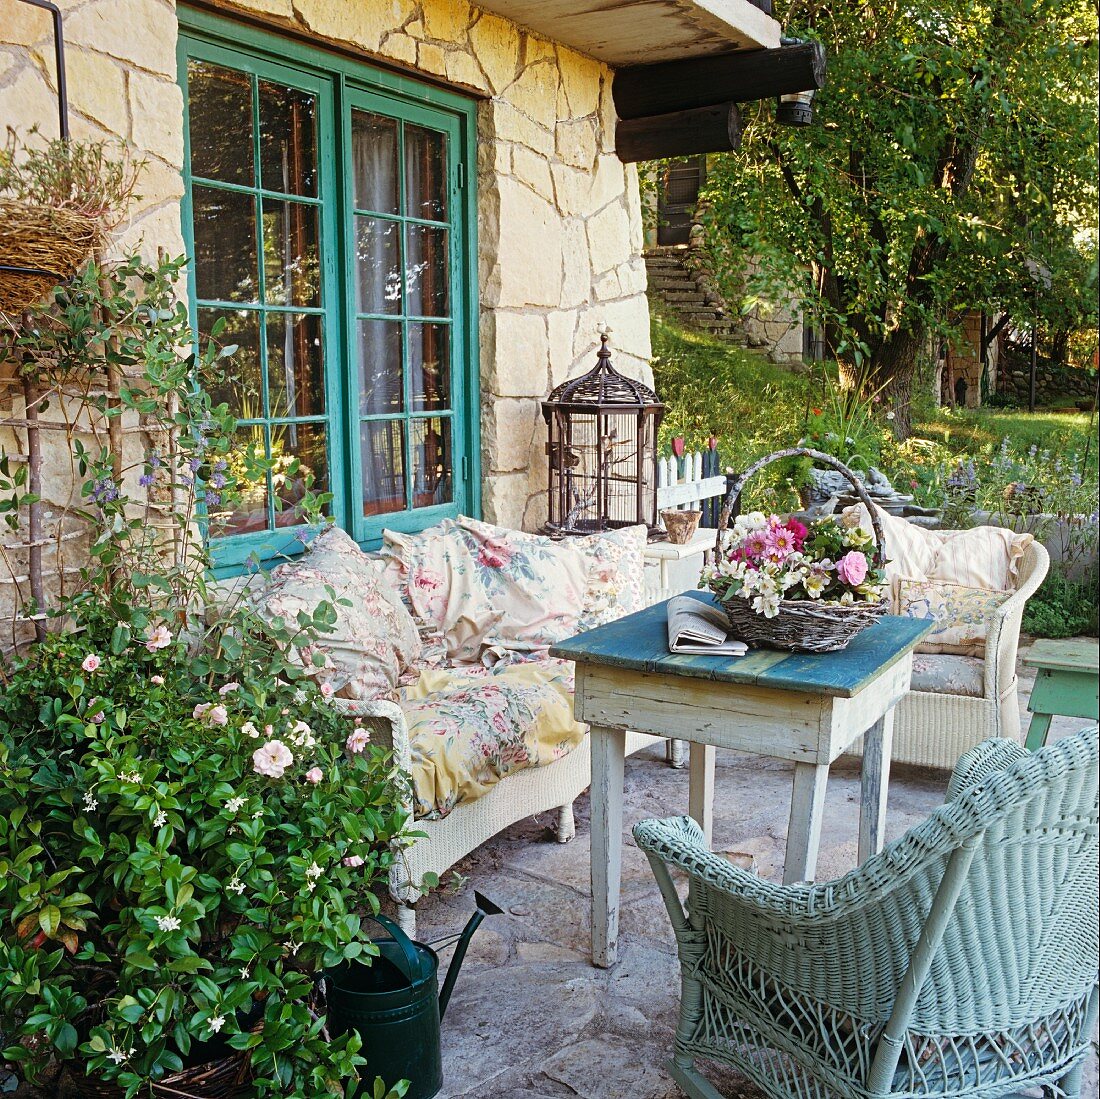 Garden terrace of stone house with vintage furniture and decorative flower arrangement in basket